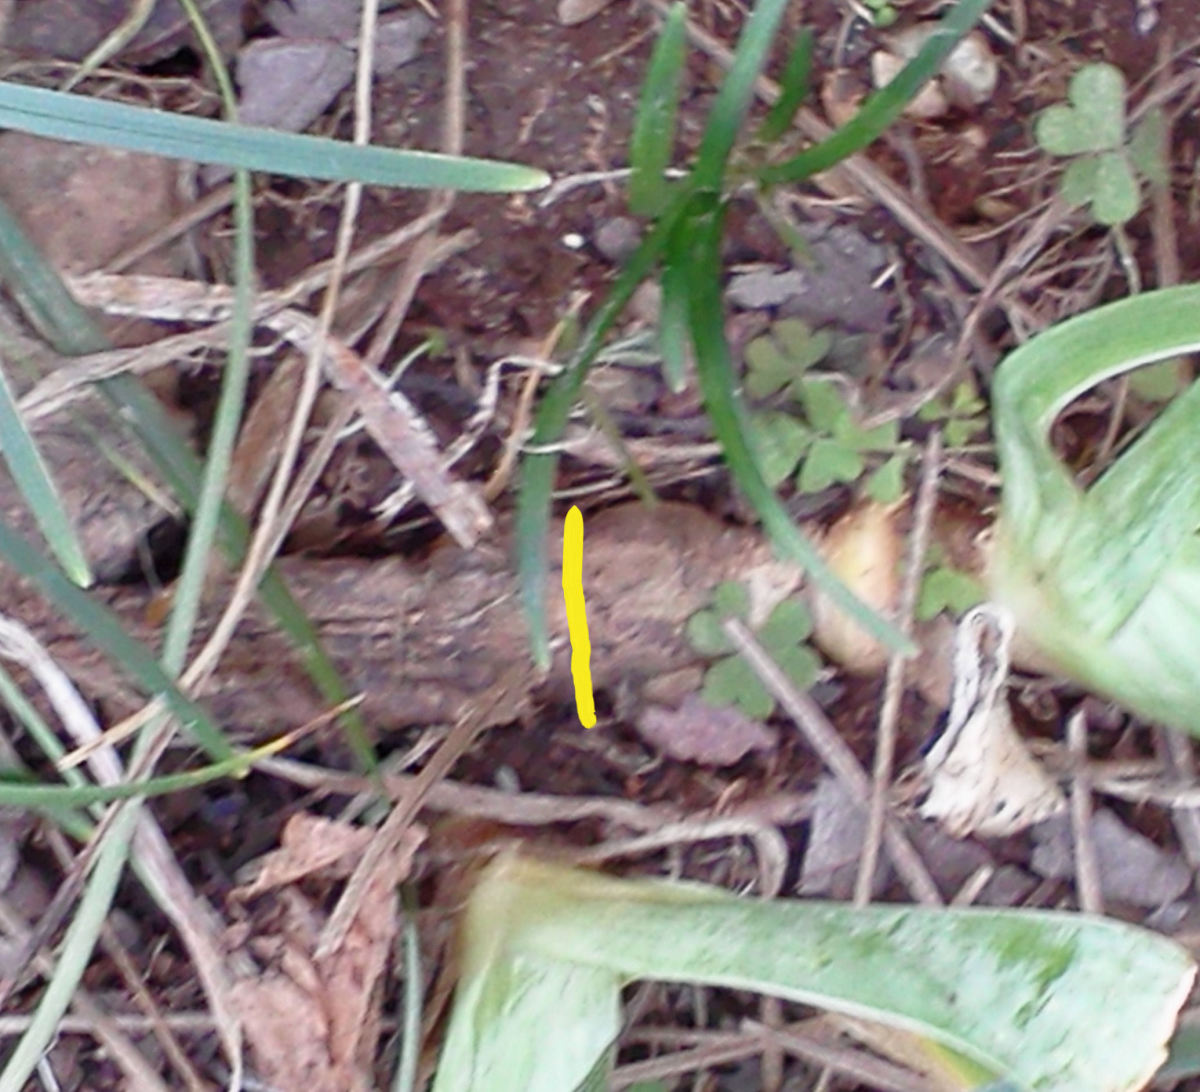 This shows a partially rotted iris rhizome. The shriveled part to the left of the yellow line should be cut off and trashed.